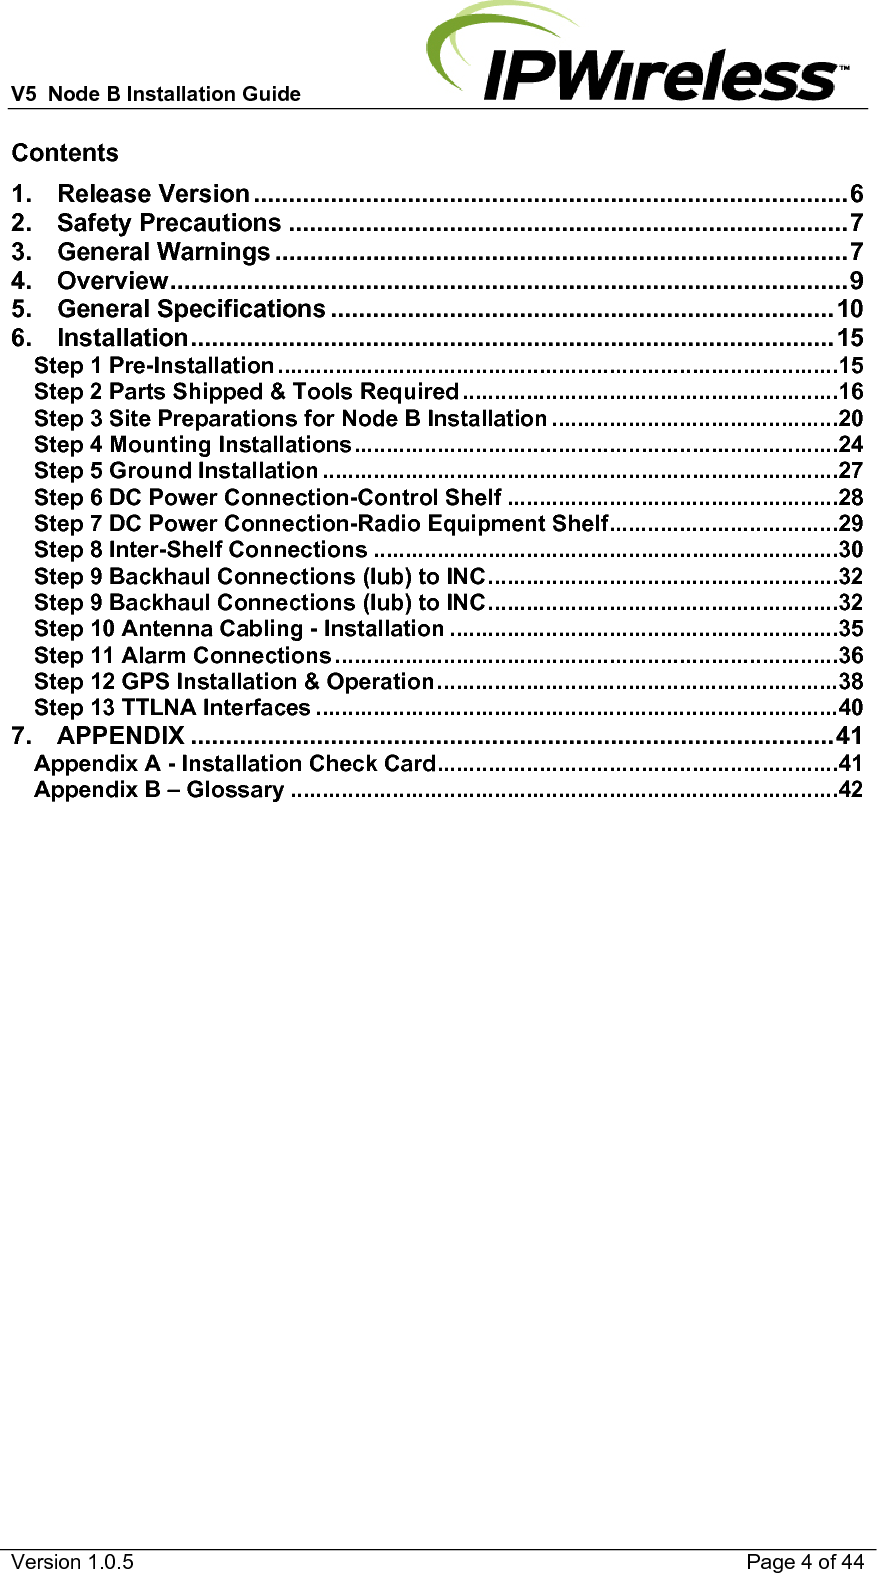 V5  Node B Installation Guide                           Version 1.0.5    Page 4 of 44 Contents 1. Release Version ..................................................................................... 6 2. Safety Precautions ................................................................................ 7 3. General Warnings .................................................................................. 7 4. Overview ................................................................................................. 9 5. General Specifications ........................................................................ 10 6. Installation ............................................................................................ 15 Step 1 Pre-Installation ........................................................................................ 15 Step 2 Parts Shipped &amp; Tools Required ........................................................... 16 Step 3 Site Preparations for Node B Installation ............................................. 20 Step 4 Mounting Installations ............................................................................ 24 Step 5 Ground Installation ................................................................................. 27 Step 6 DC Power Connection-Control Shelf .................................................... 28 Step 7 DC Power Connection-Radio Equipment Shelf .................................... 29 Step 8 Inter-Shelf Connections ......................................................................... 30 Step 9 Backhaul Connections (Iub) to INC ....................................................... 32 Step 9 Backhaul Connections (Iub) to INC ....................................................... 32 Step 10 Antenna Cabling - Installation ............................................................. 35 Step 11 Alarm Connections ............................................................................... 36 Step 12 GPS Installation &amp; Operation ............................................................... 38 Step 13 TTLNA Interfaces .................................................................................. 40 7. APPENDIX ............................................................................................ 41 Appendix A - Installation Check Card ............................................................... 41 Appendix B – Glossary ...................................................................................... 42  